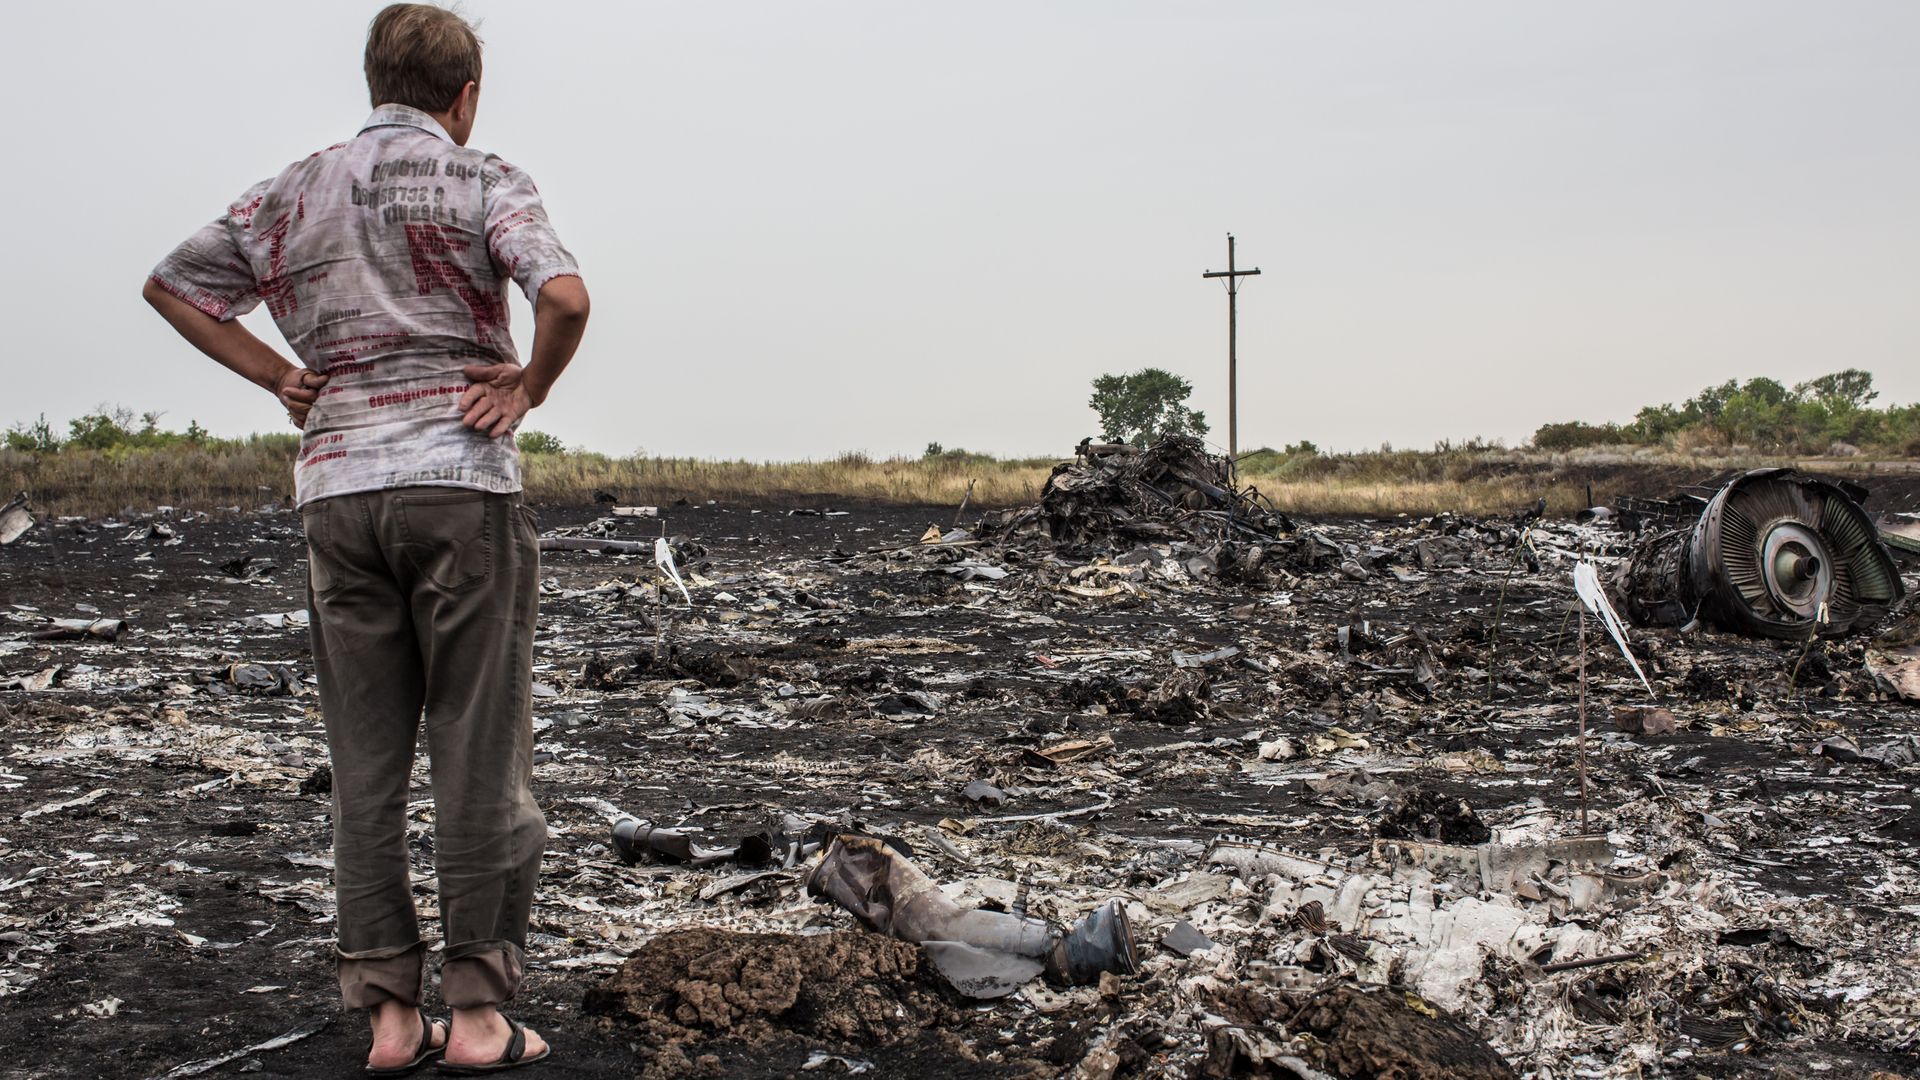 A man looks at debris from an Malaysia Airlines plane crash on July 18, 2014 in Grabovka, Ukraine. Photo: Brendan Hoffman/Getty Images